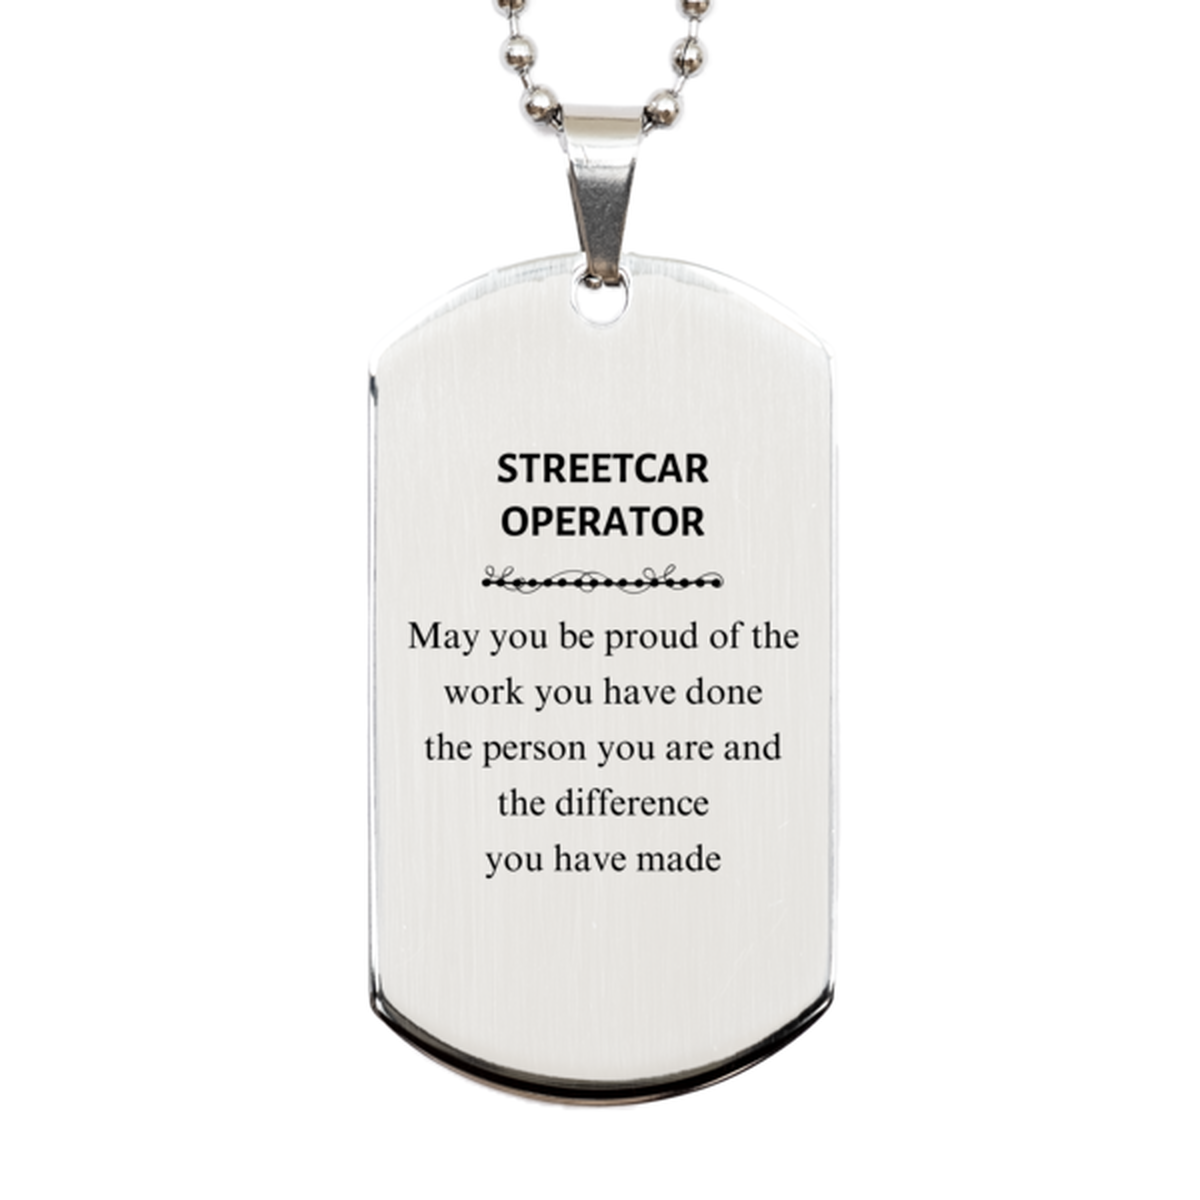 Streetcar Operator May you be proud of the work you have done, Retirement Streetcar Operator Silver Dog Tag for Colleague Appreciation Gifts Amazing for Streetcar Operator